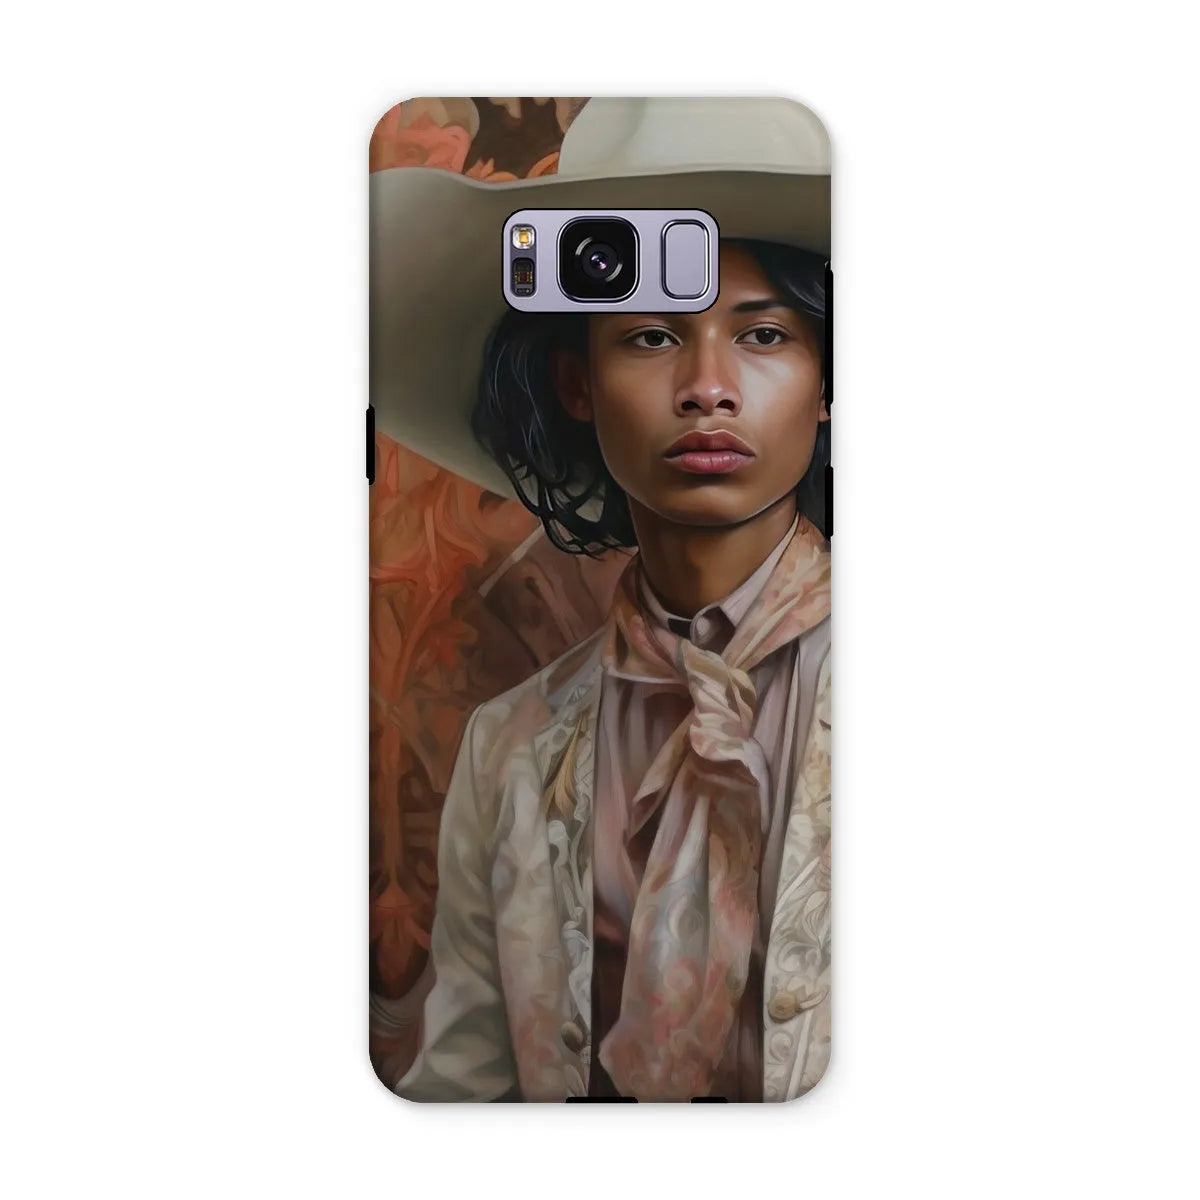 Arjuna The Gay Cowboy - Gay Aesthetic Art Phone Case - Samsung Galaxy S8 Plus / Matte - Mobile Phone Cases - Aesthetic